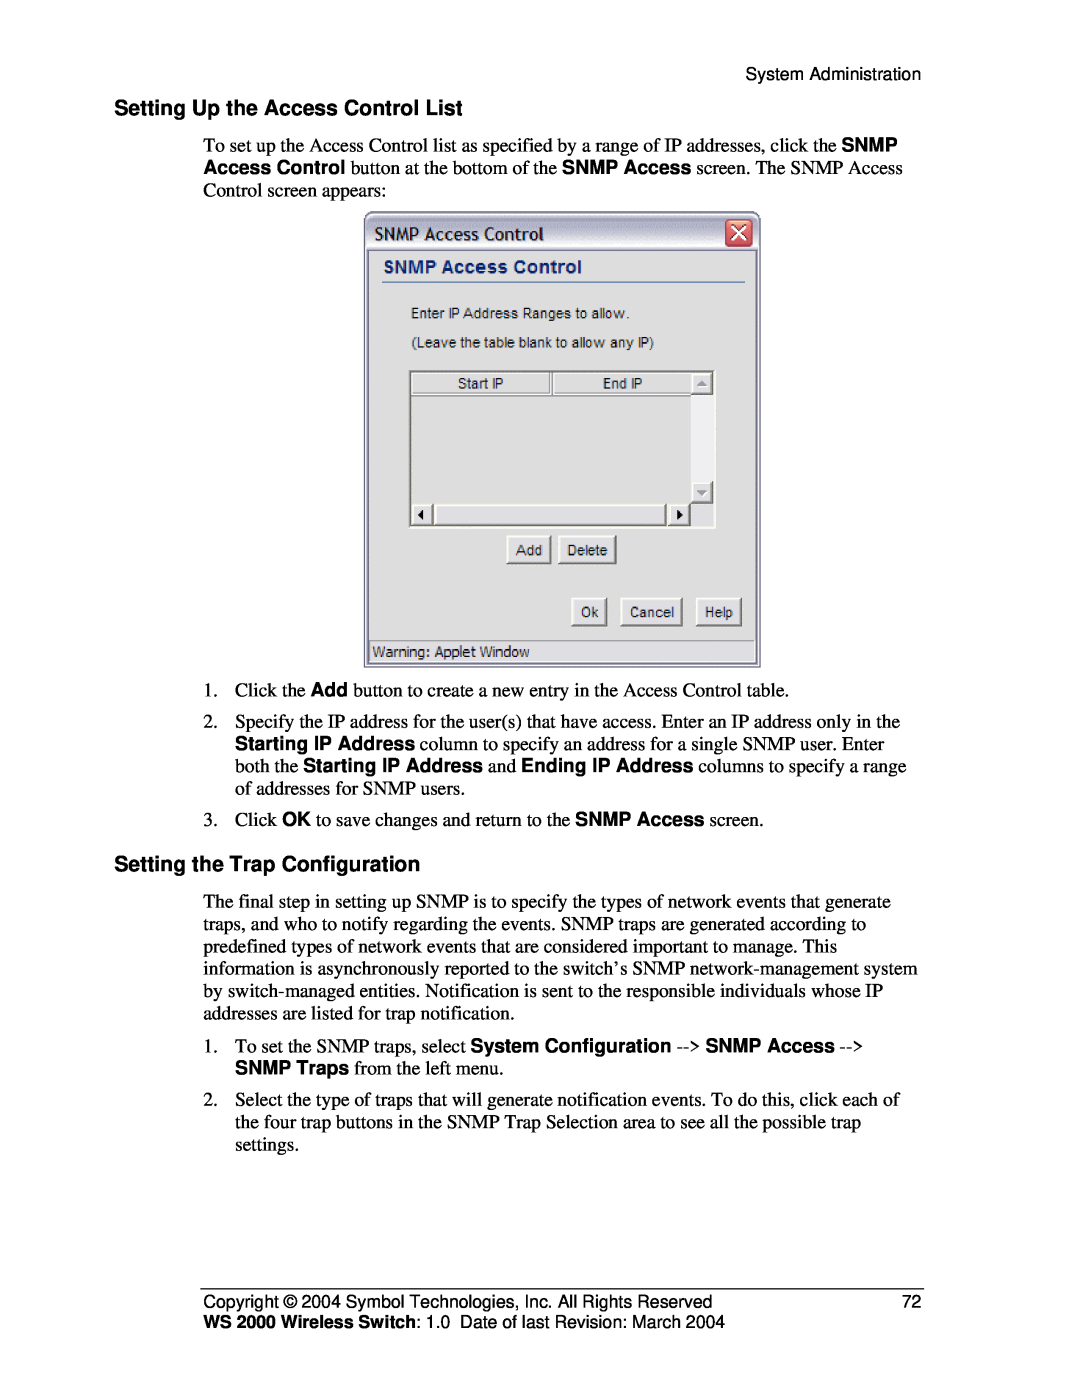 Symbol Technologies WS 2000 manual Setting Up the Access Control List, Setting the Trap Configuration 